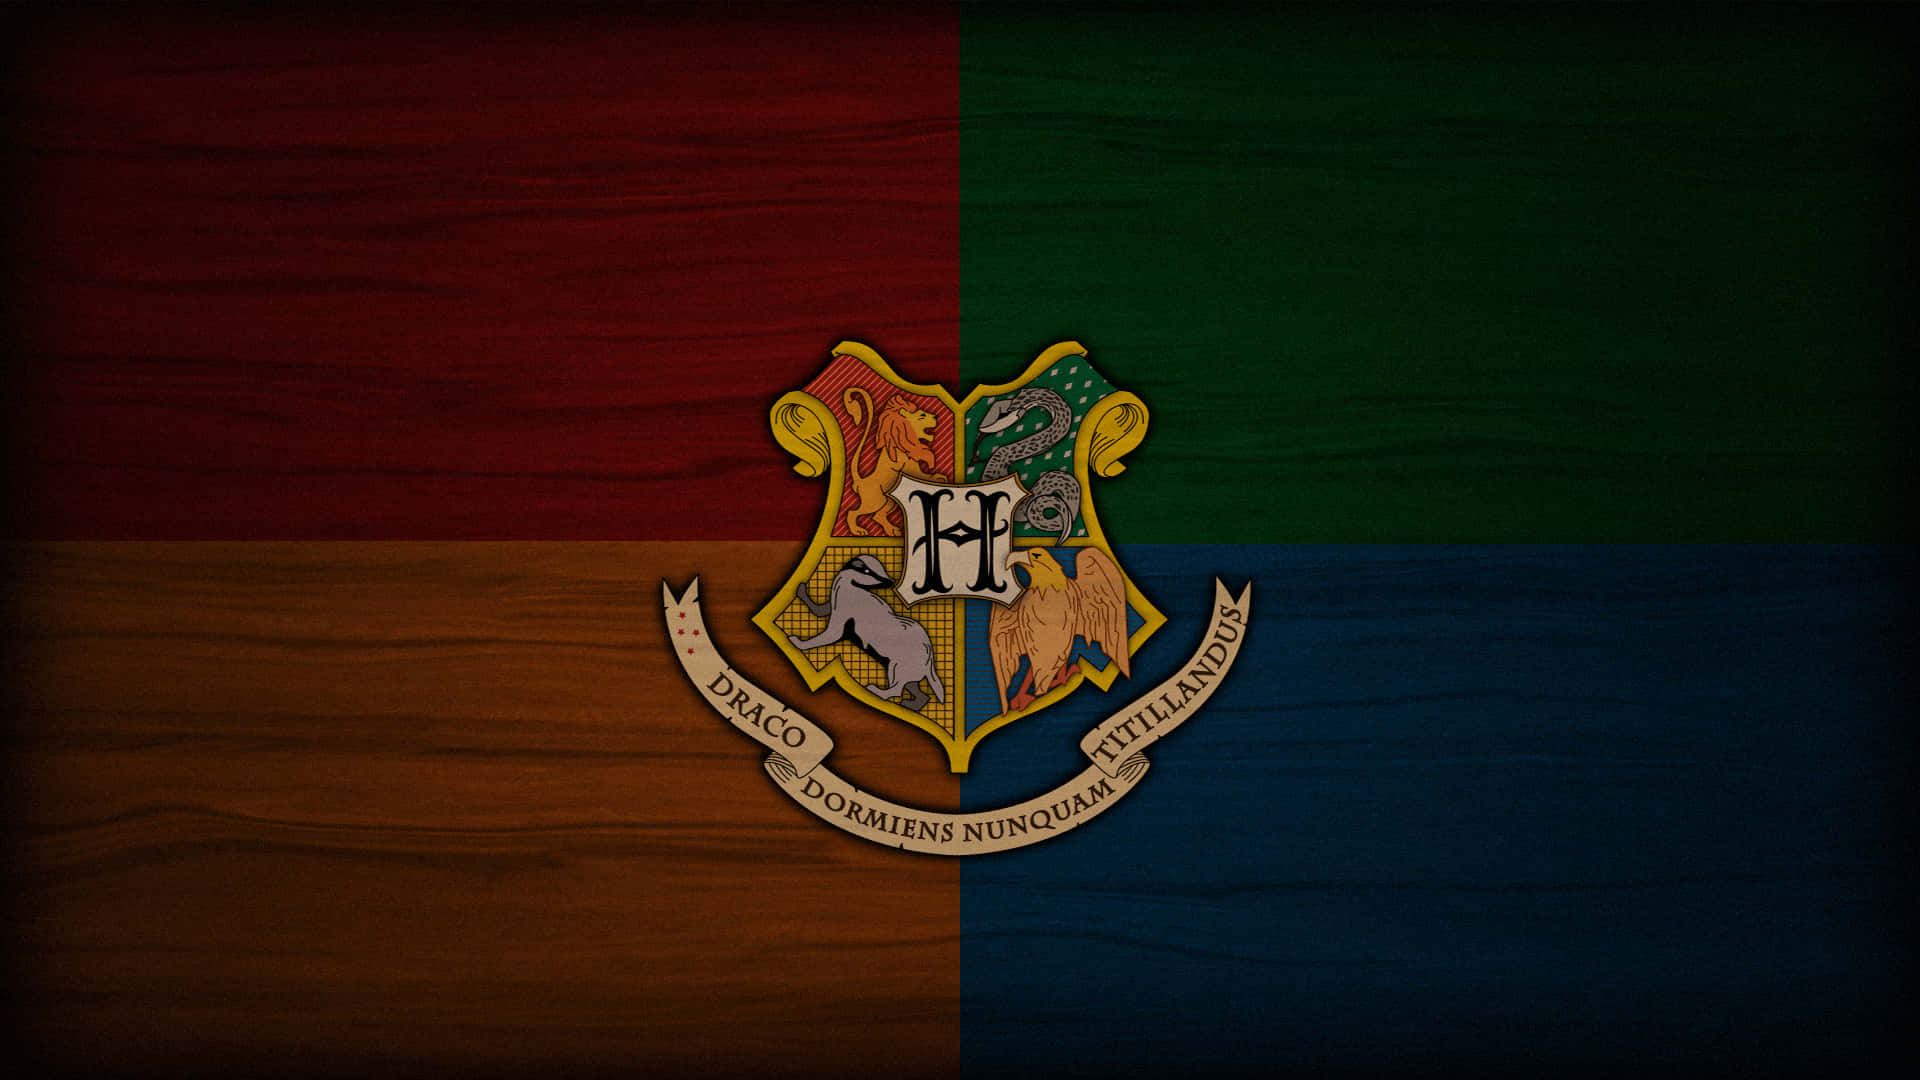 Join the Ravenclaw house and be part of the magical world of Harry Potter. Wallpaper